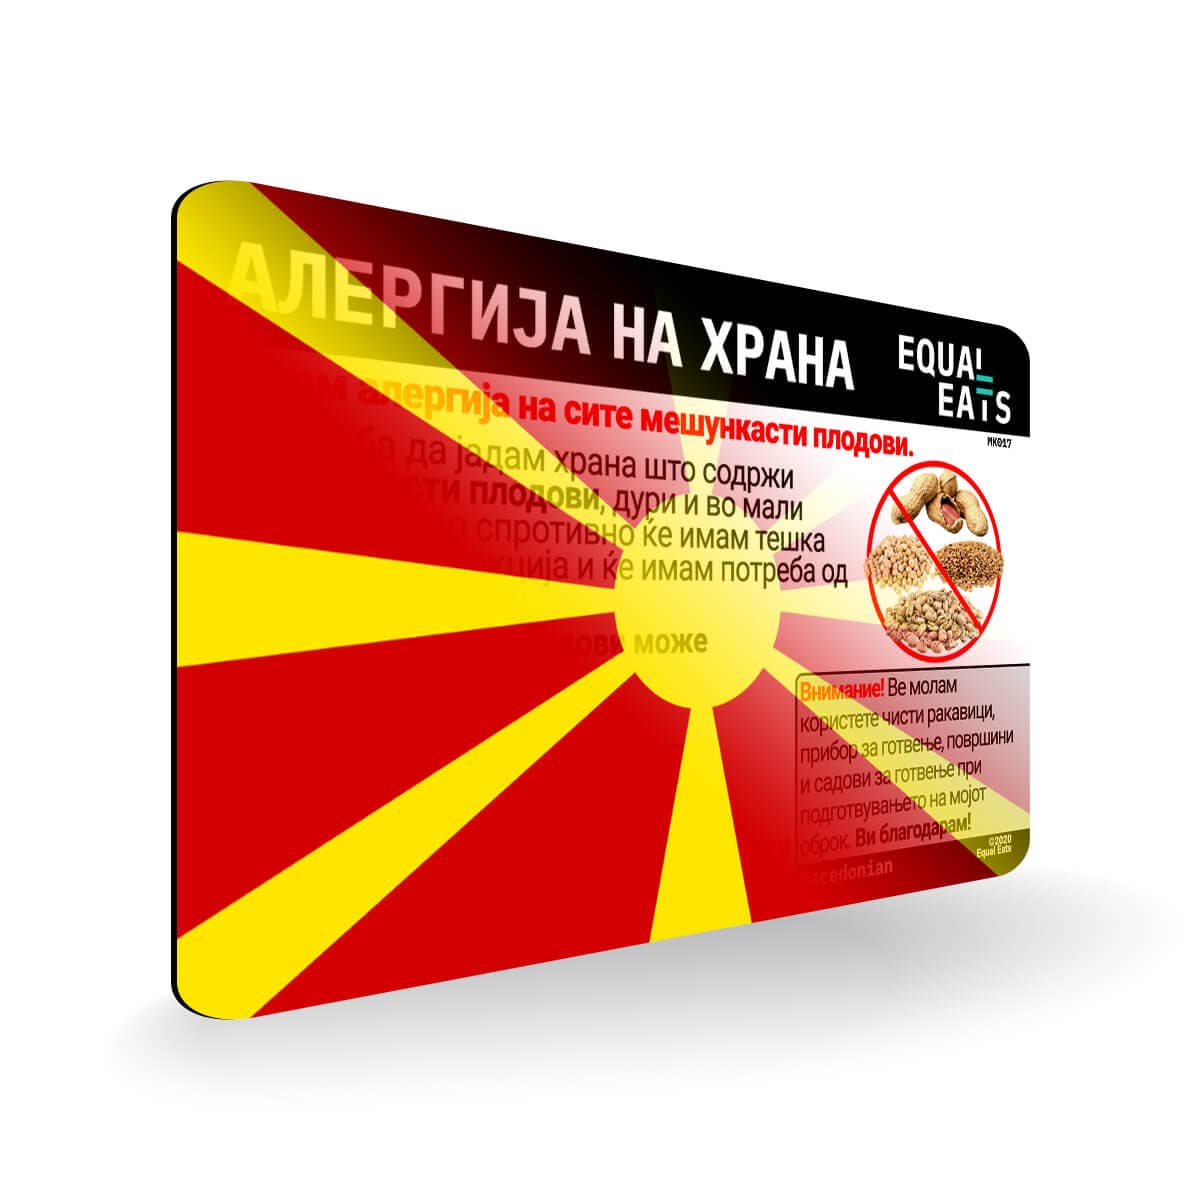 Legume Allergy in Macedonian. Legume Allergy Card for Macedonia